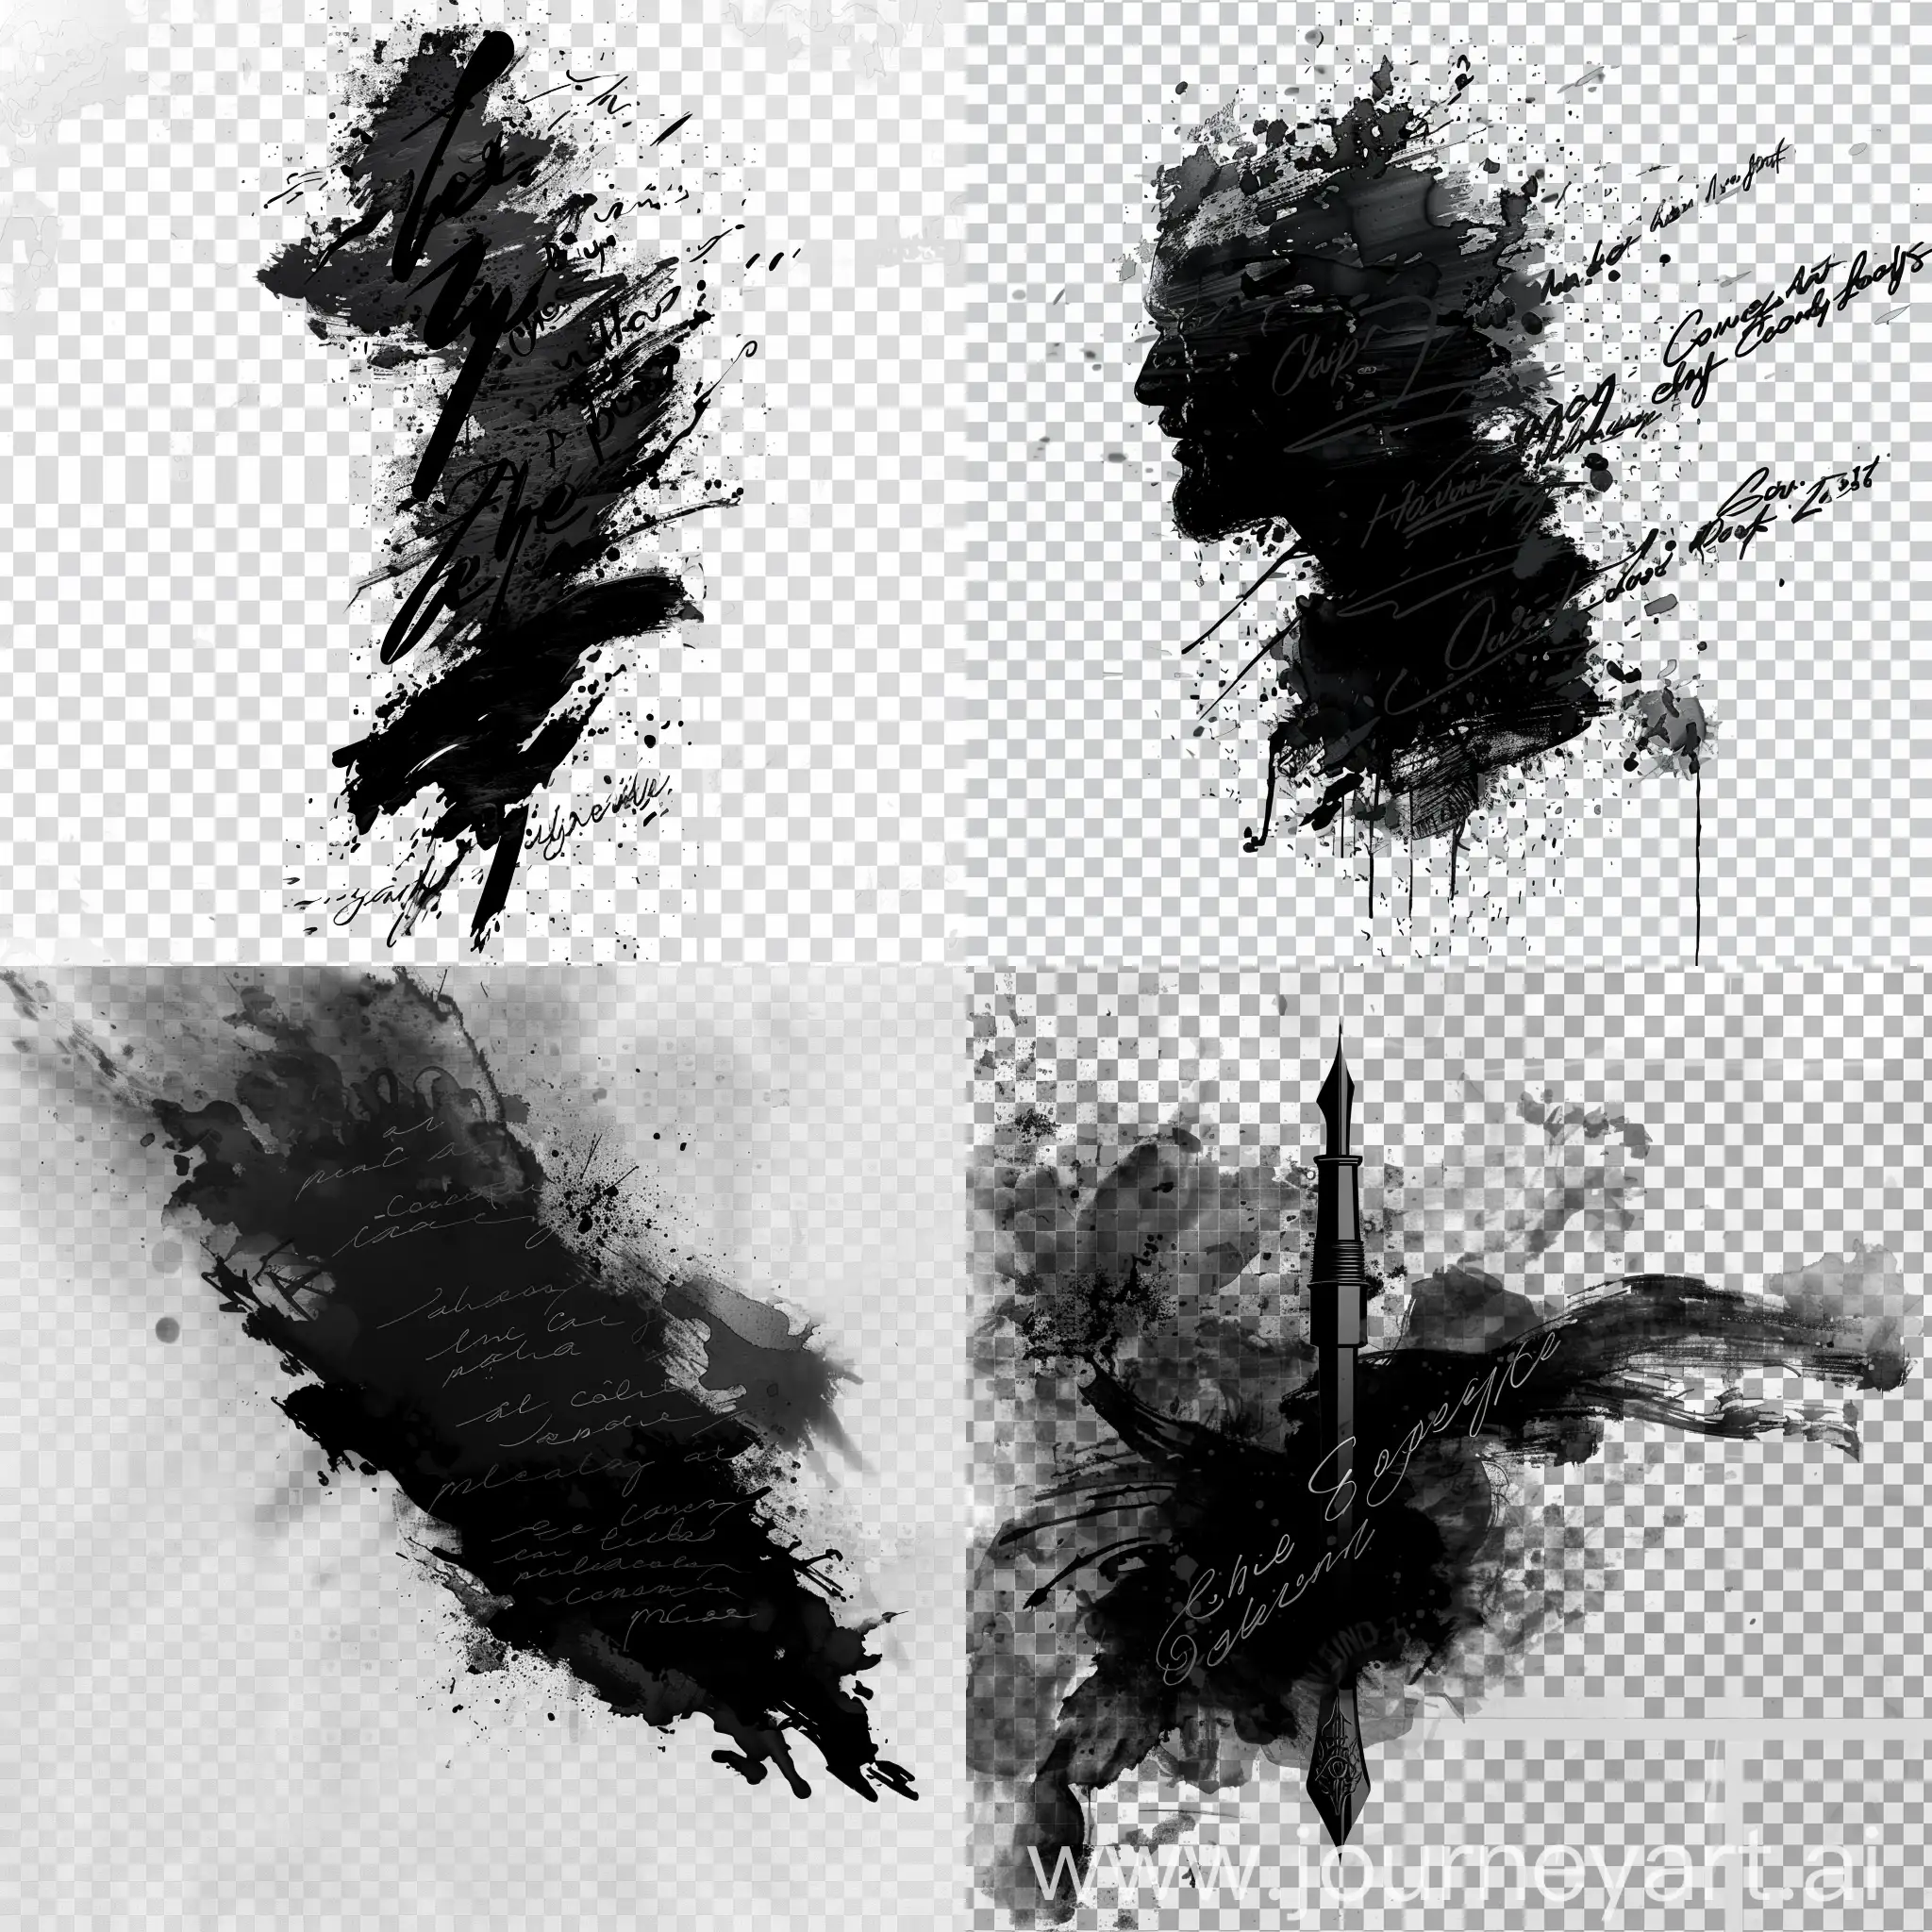 Abstract-Concept-Art-with-Ink-Smudges-on-Transparent-Background